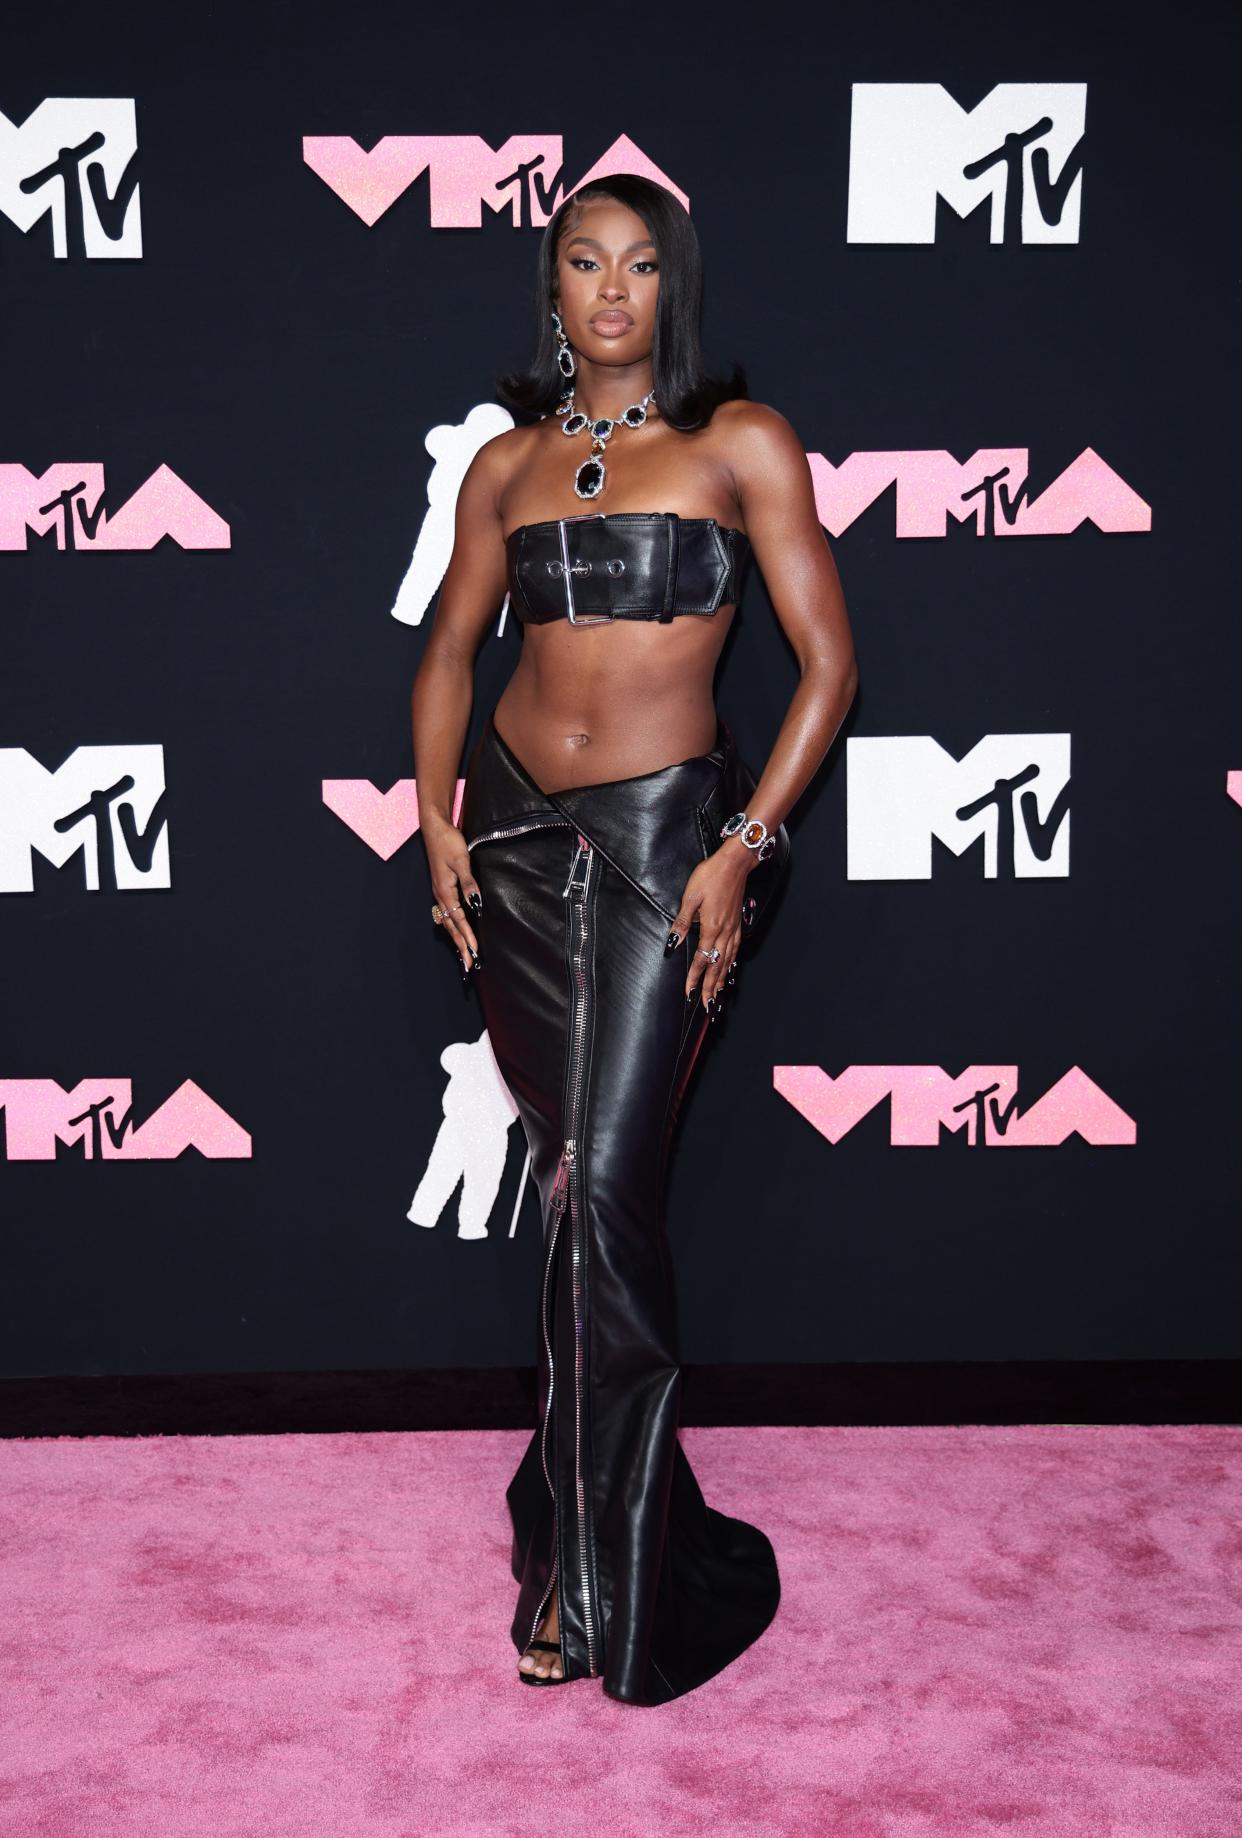 Coco Jones typically rocks a bra top for performances and red carpets.